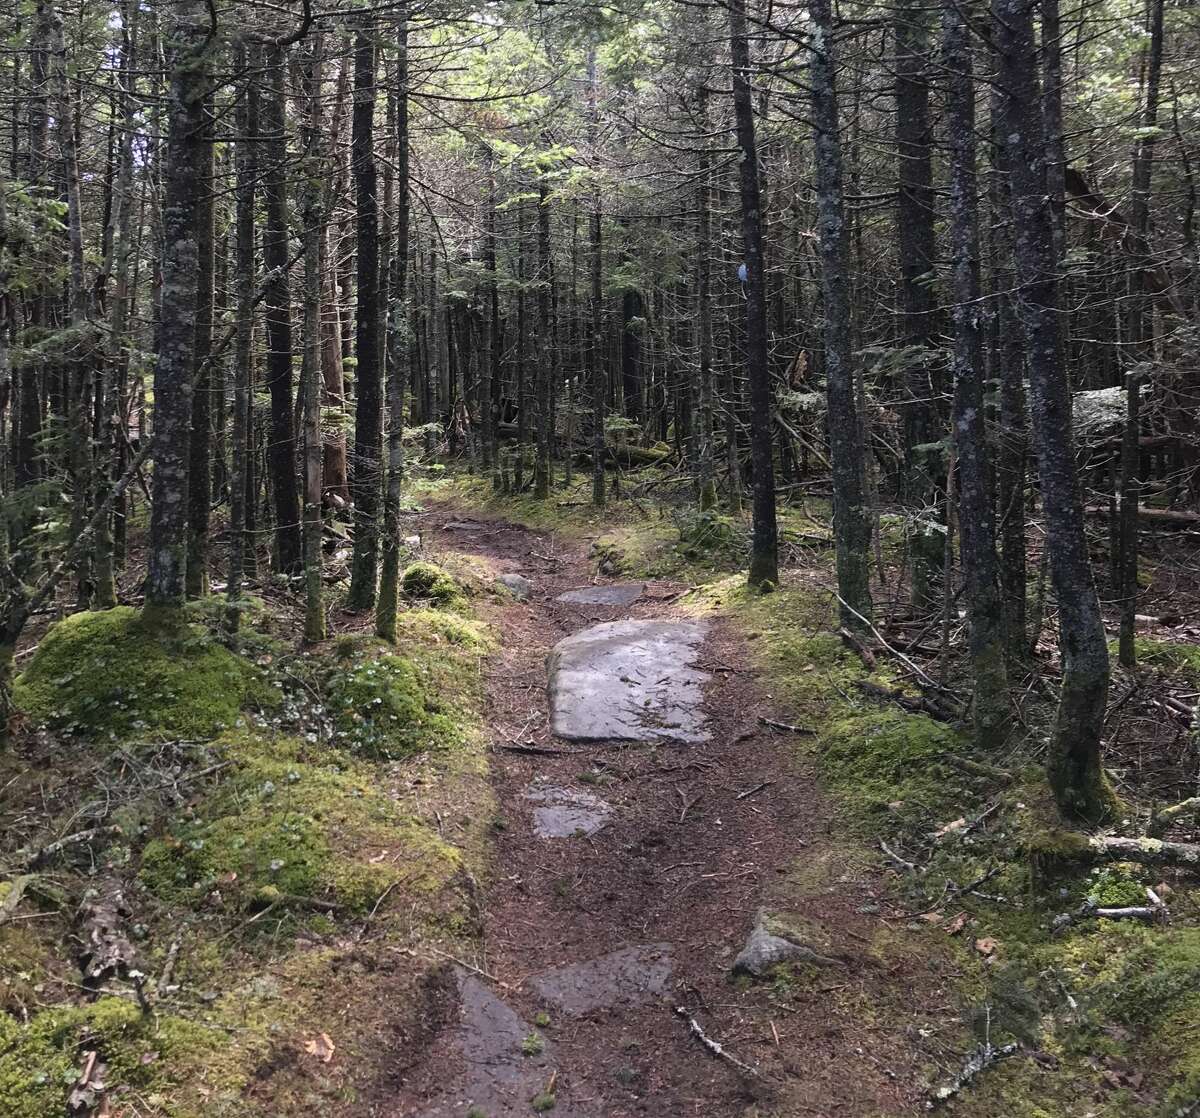 A herd path on Panther Mountain in the Catskills. Herd paths are created when hikers stray off-trail, leading to the destruction of plant life.